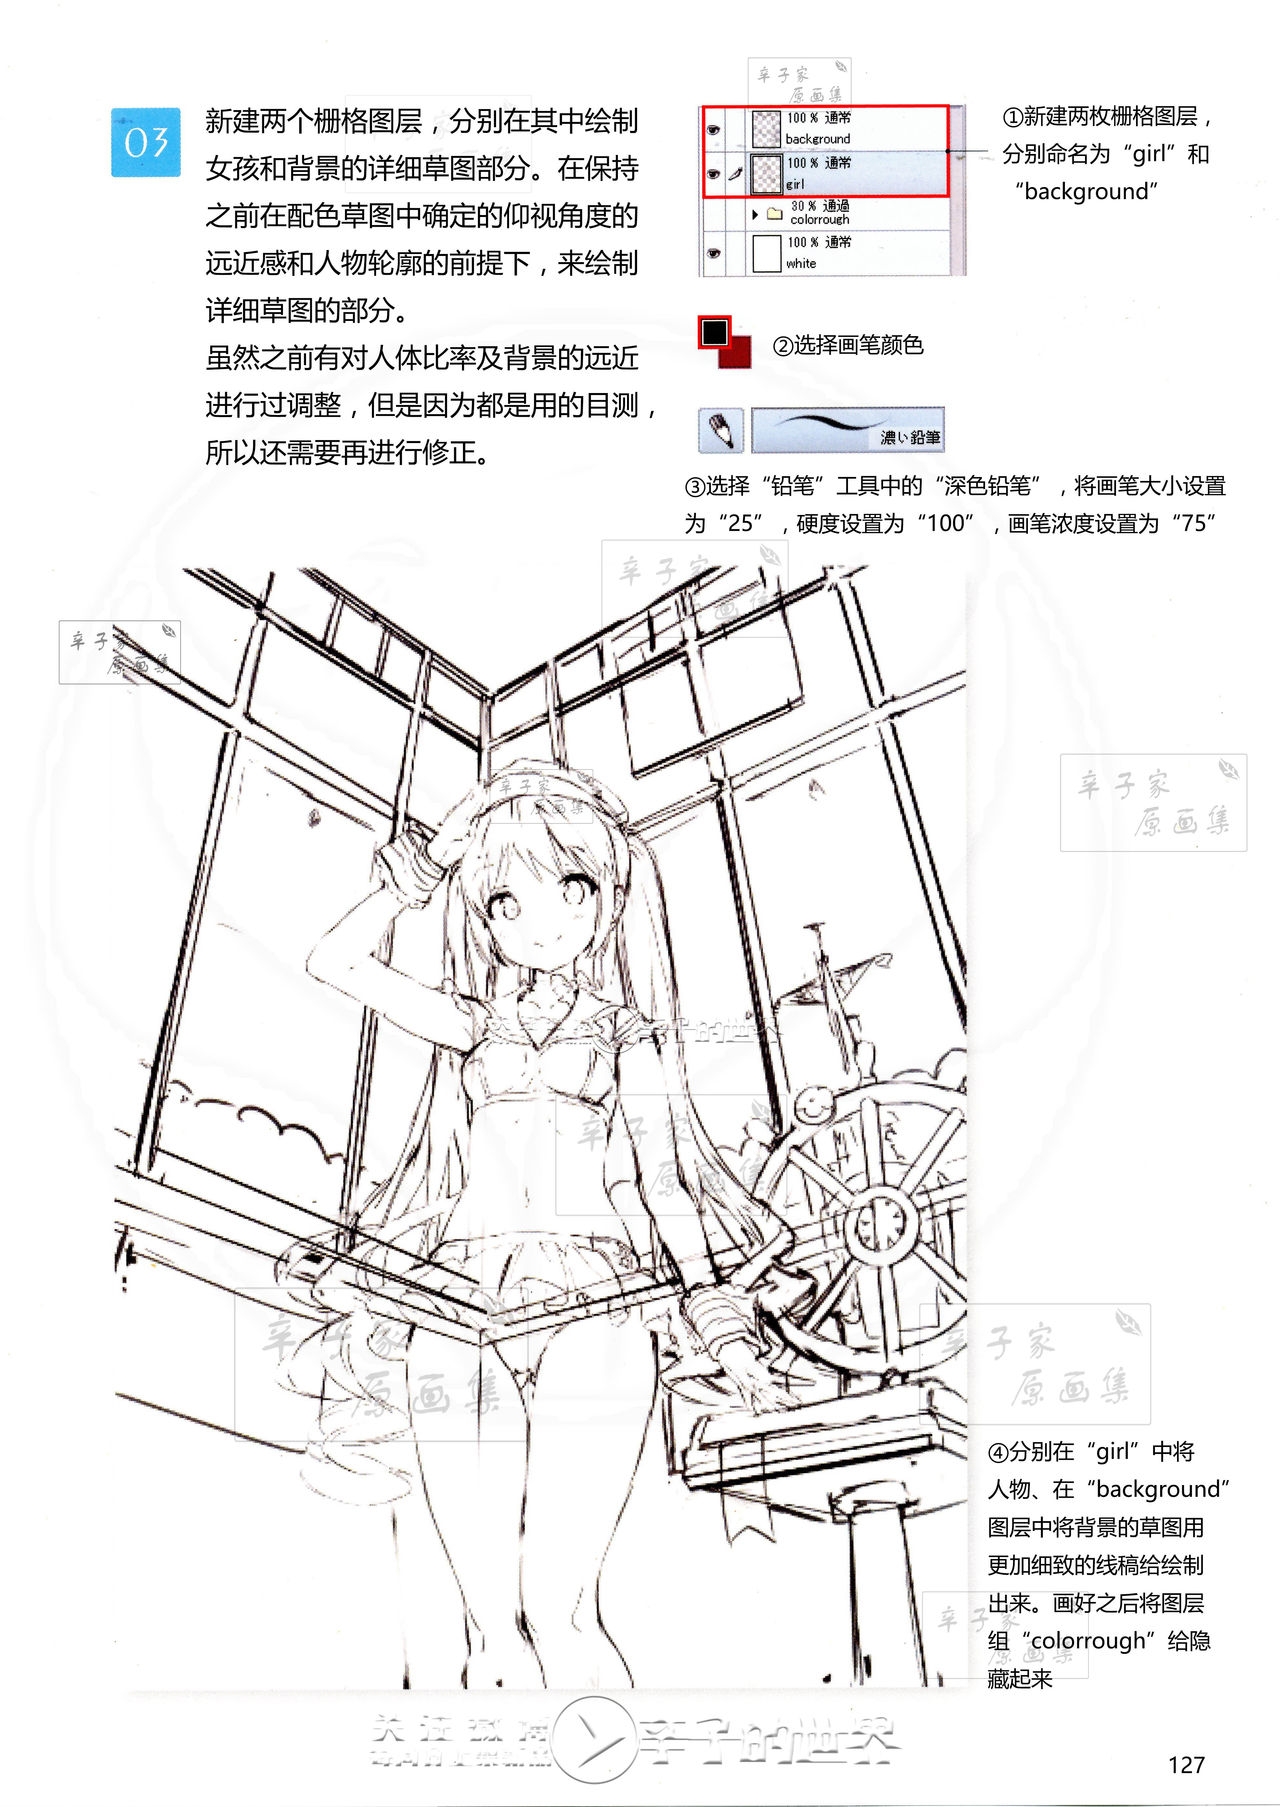 [Anmi] Lets Make ★ Character CG illustration techniques vol.9 [Chinese] 125